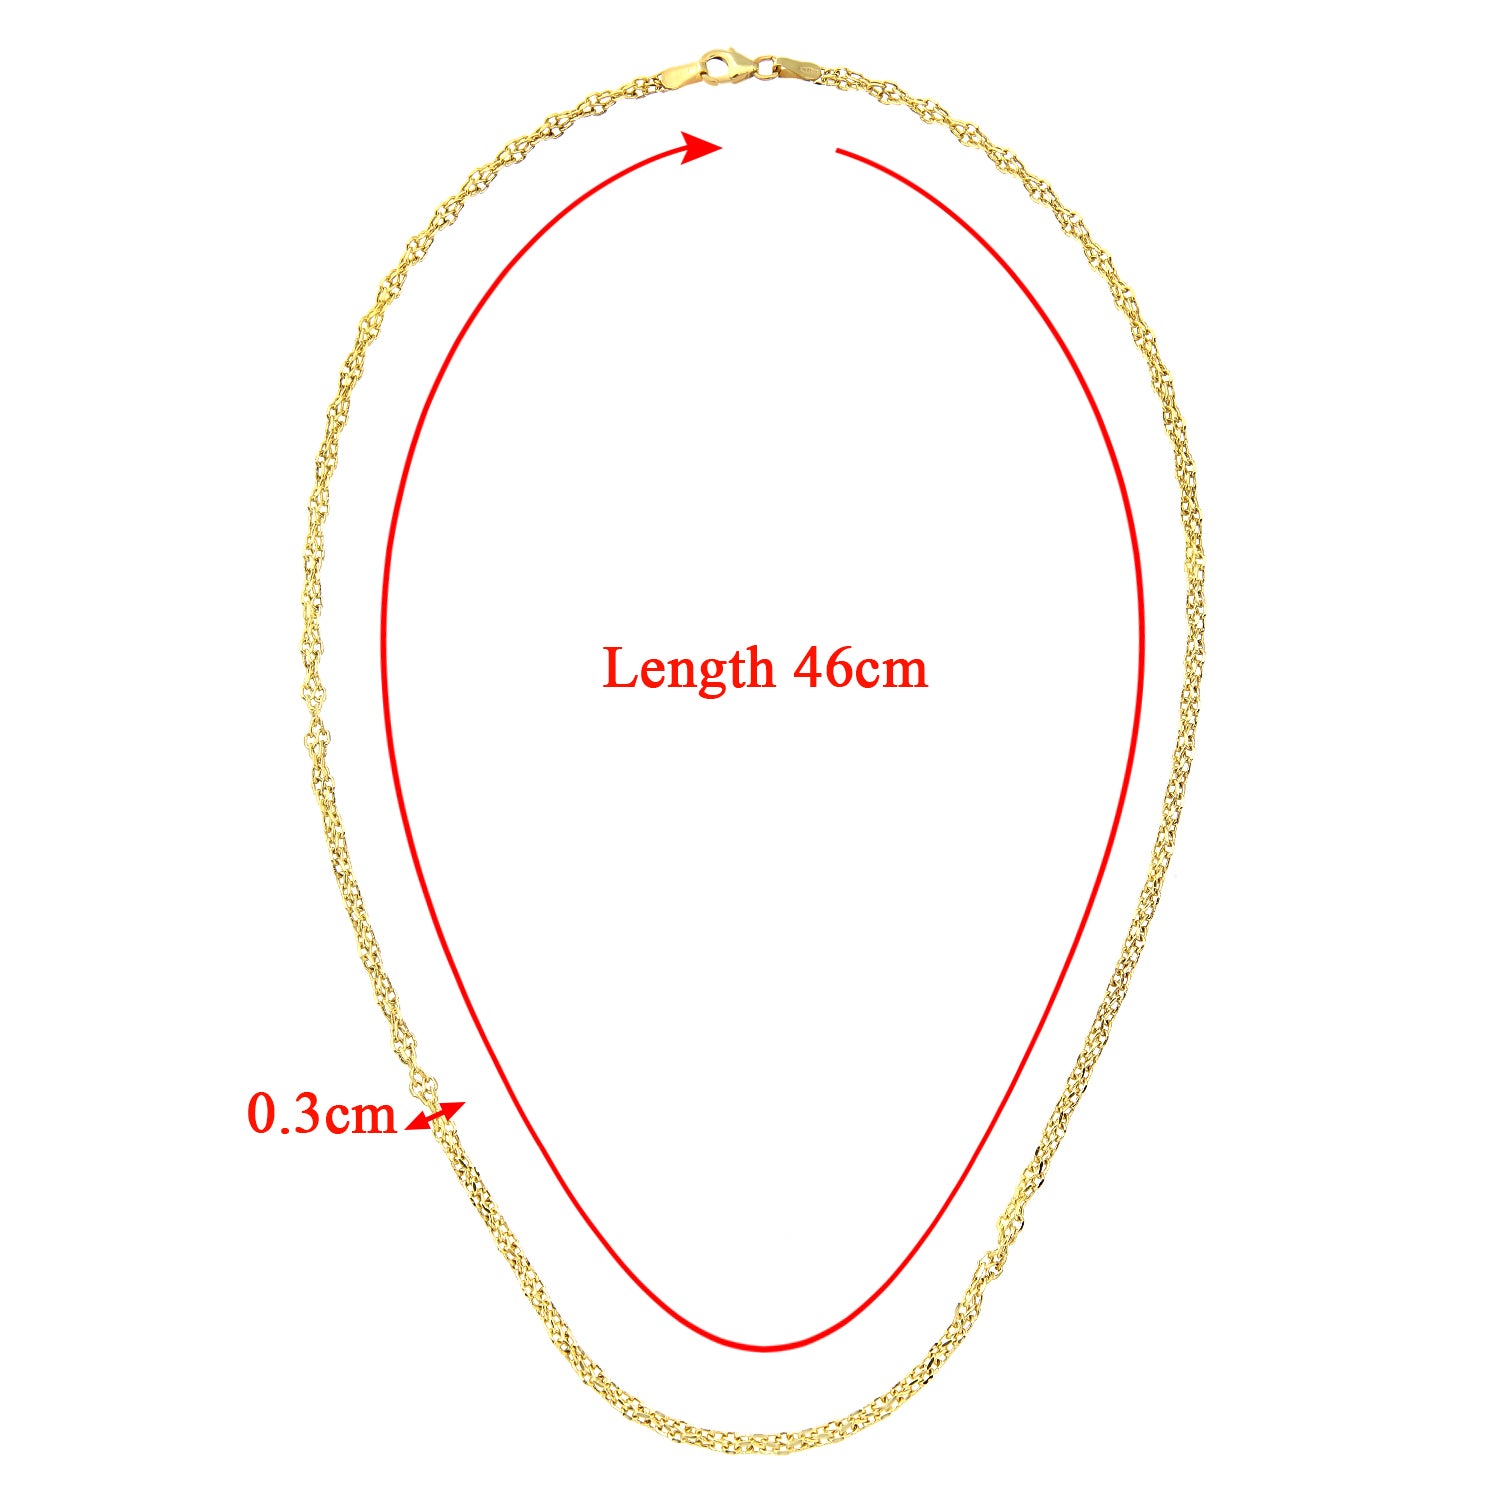 9ct Gold  Figure of 8 Infinity Link Chain Necklace 3mm - 050AXLASPD